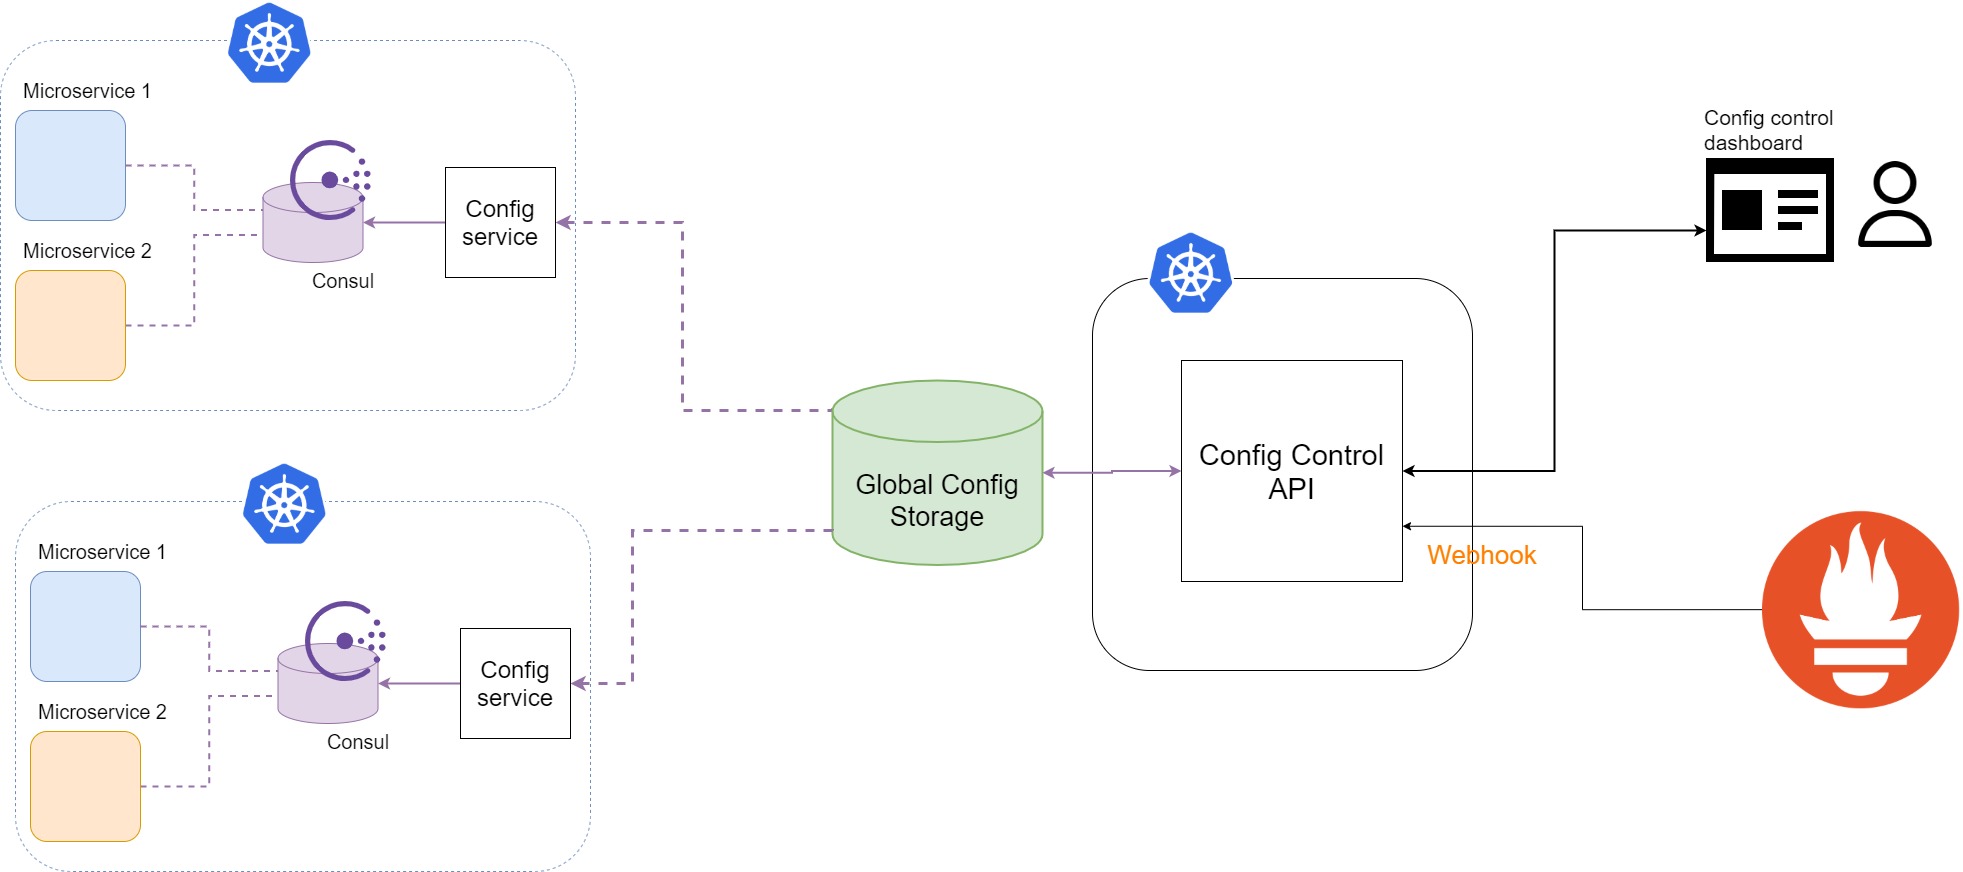 adding the webhook api to already existing config control api so it can handle webhook triggers from prometheus. Api also serves api to control configuration in easy manner. When new config or change in config is written to storage microservices in kubernetes cluster namespaces are pulling new config and writing it ot consul